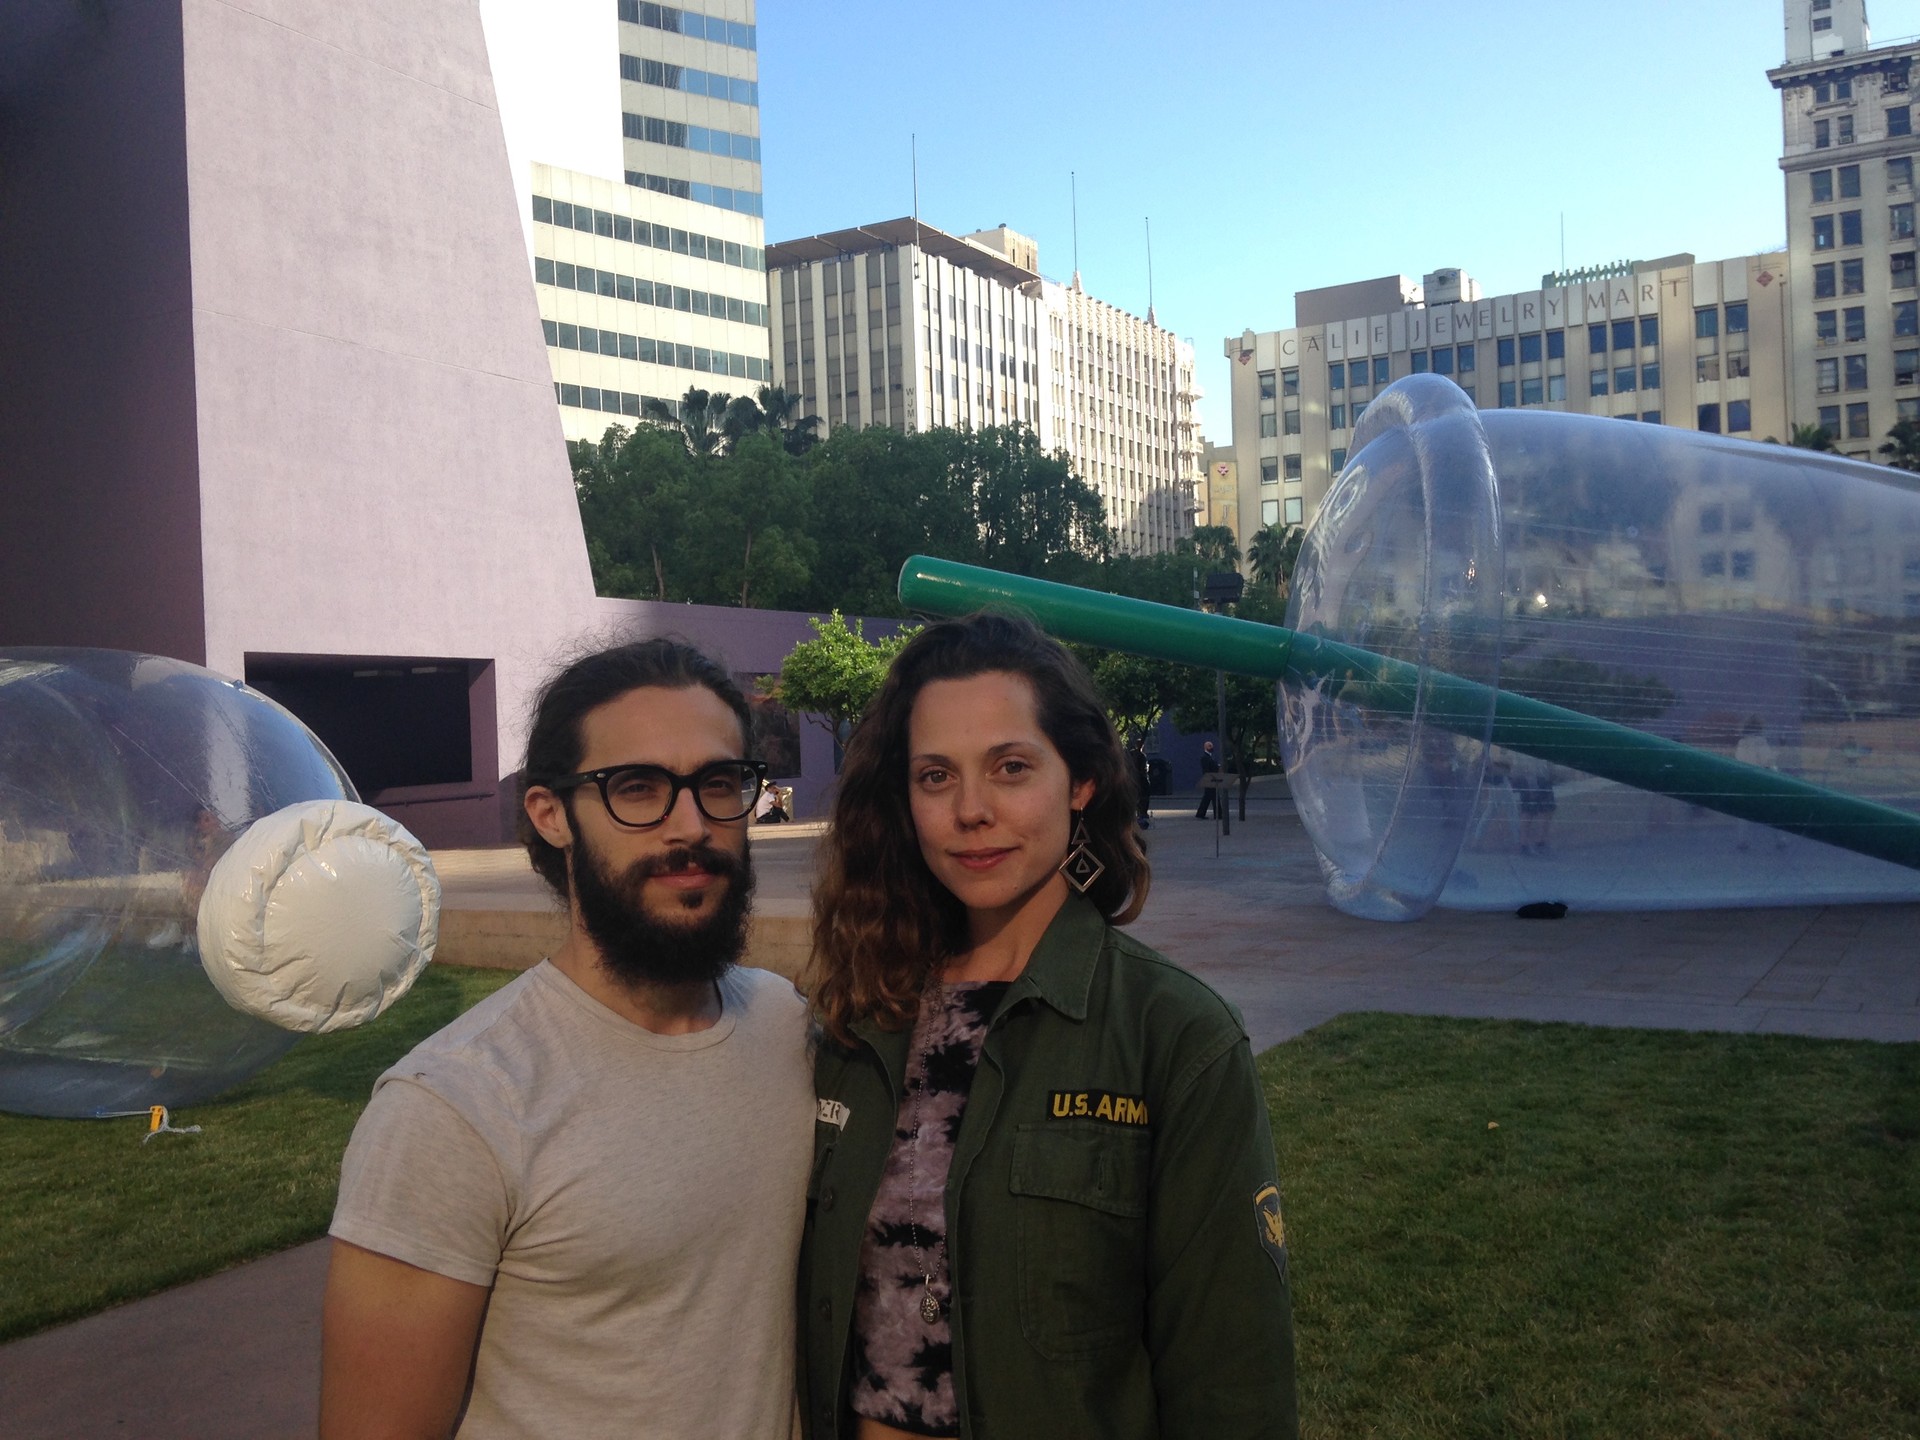 The goal of artists Matthew LaPenta and Jana Cruder is to change how people think about plastic, and influence consumer behavior.